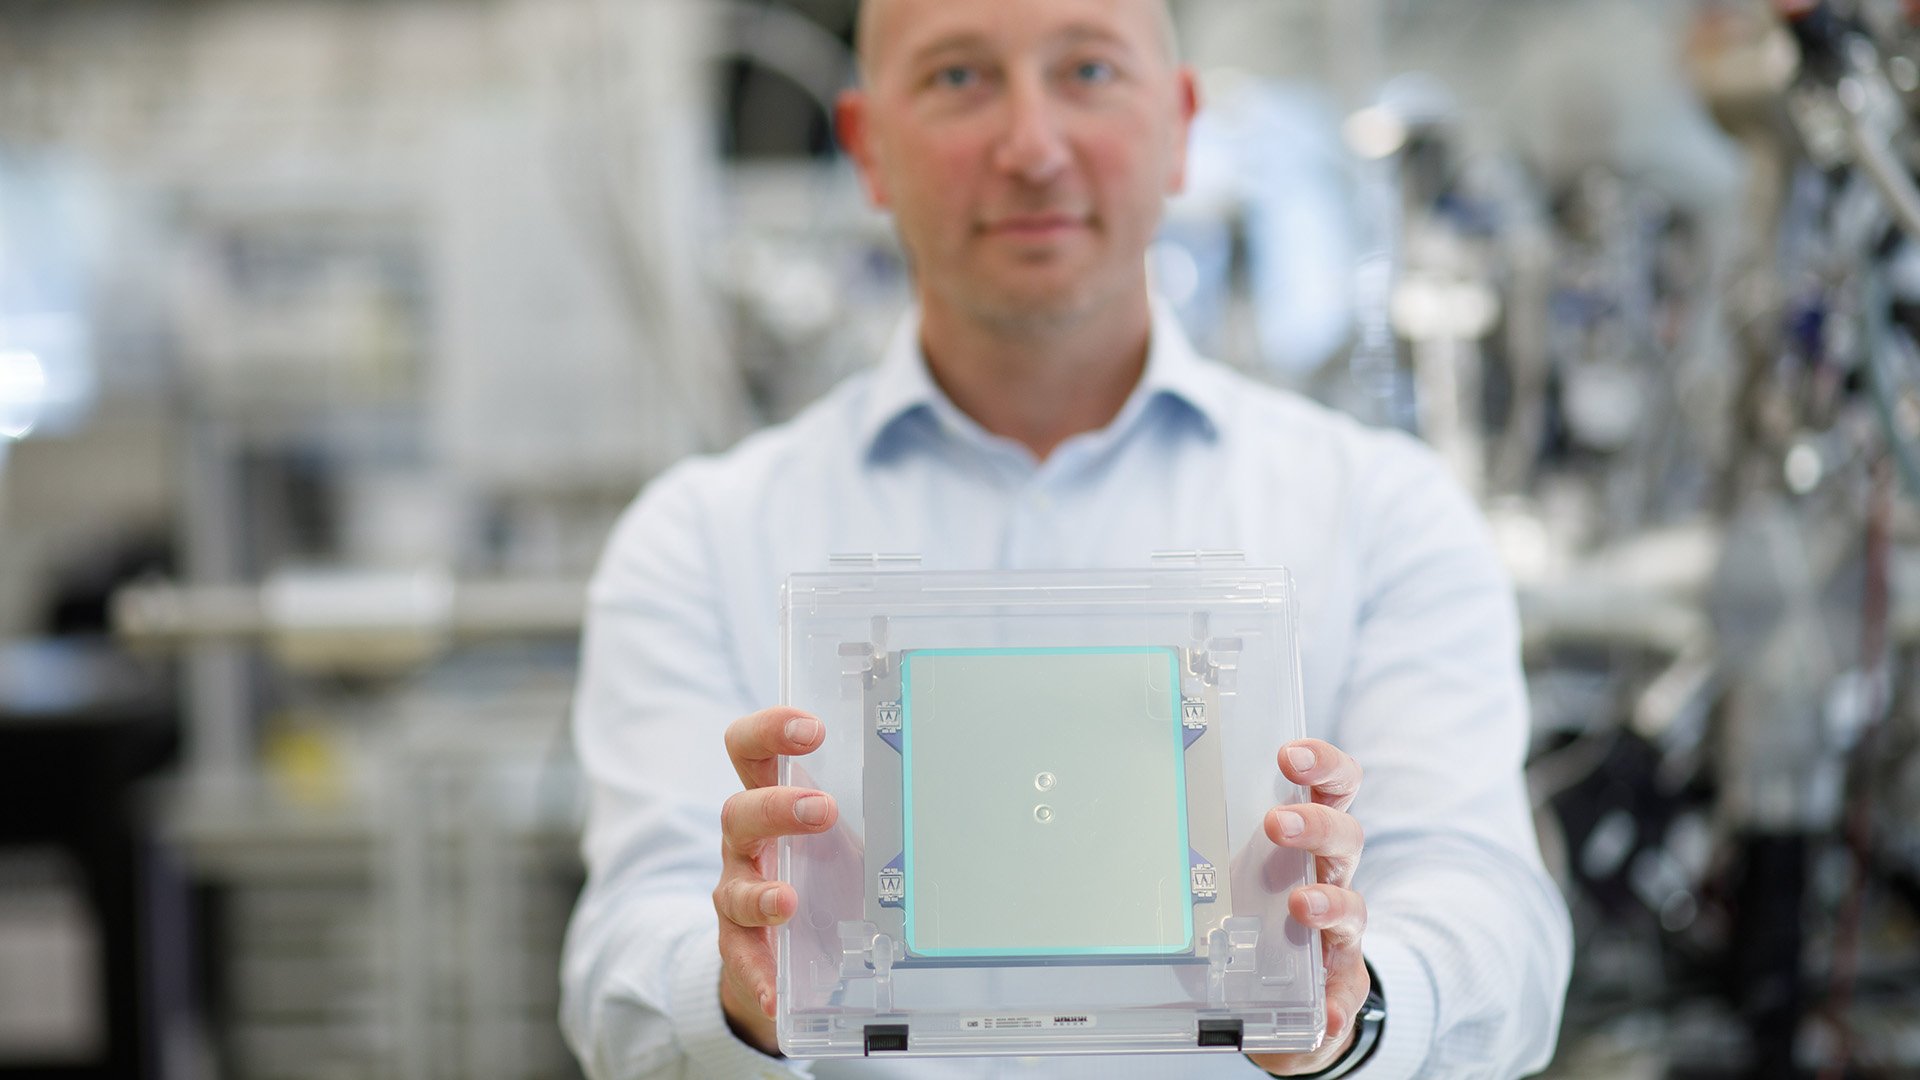 ASML system engineer Guido Salmaso holds an ASML EUV pellicle inside a laboratory at ASML in Veldhoven, the Netherlands.